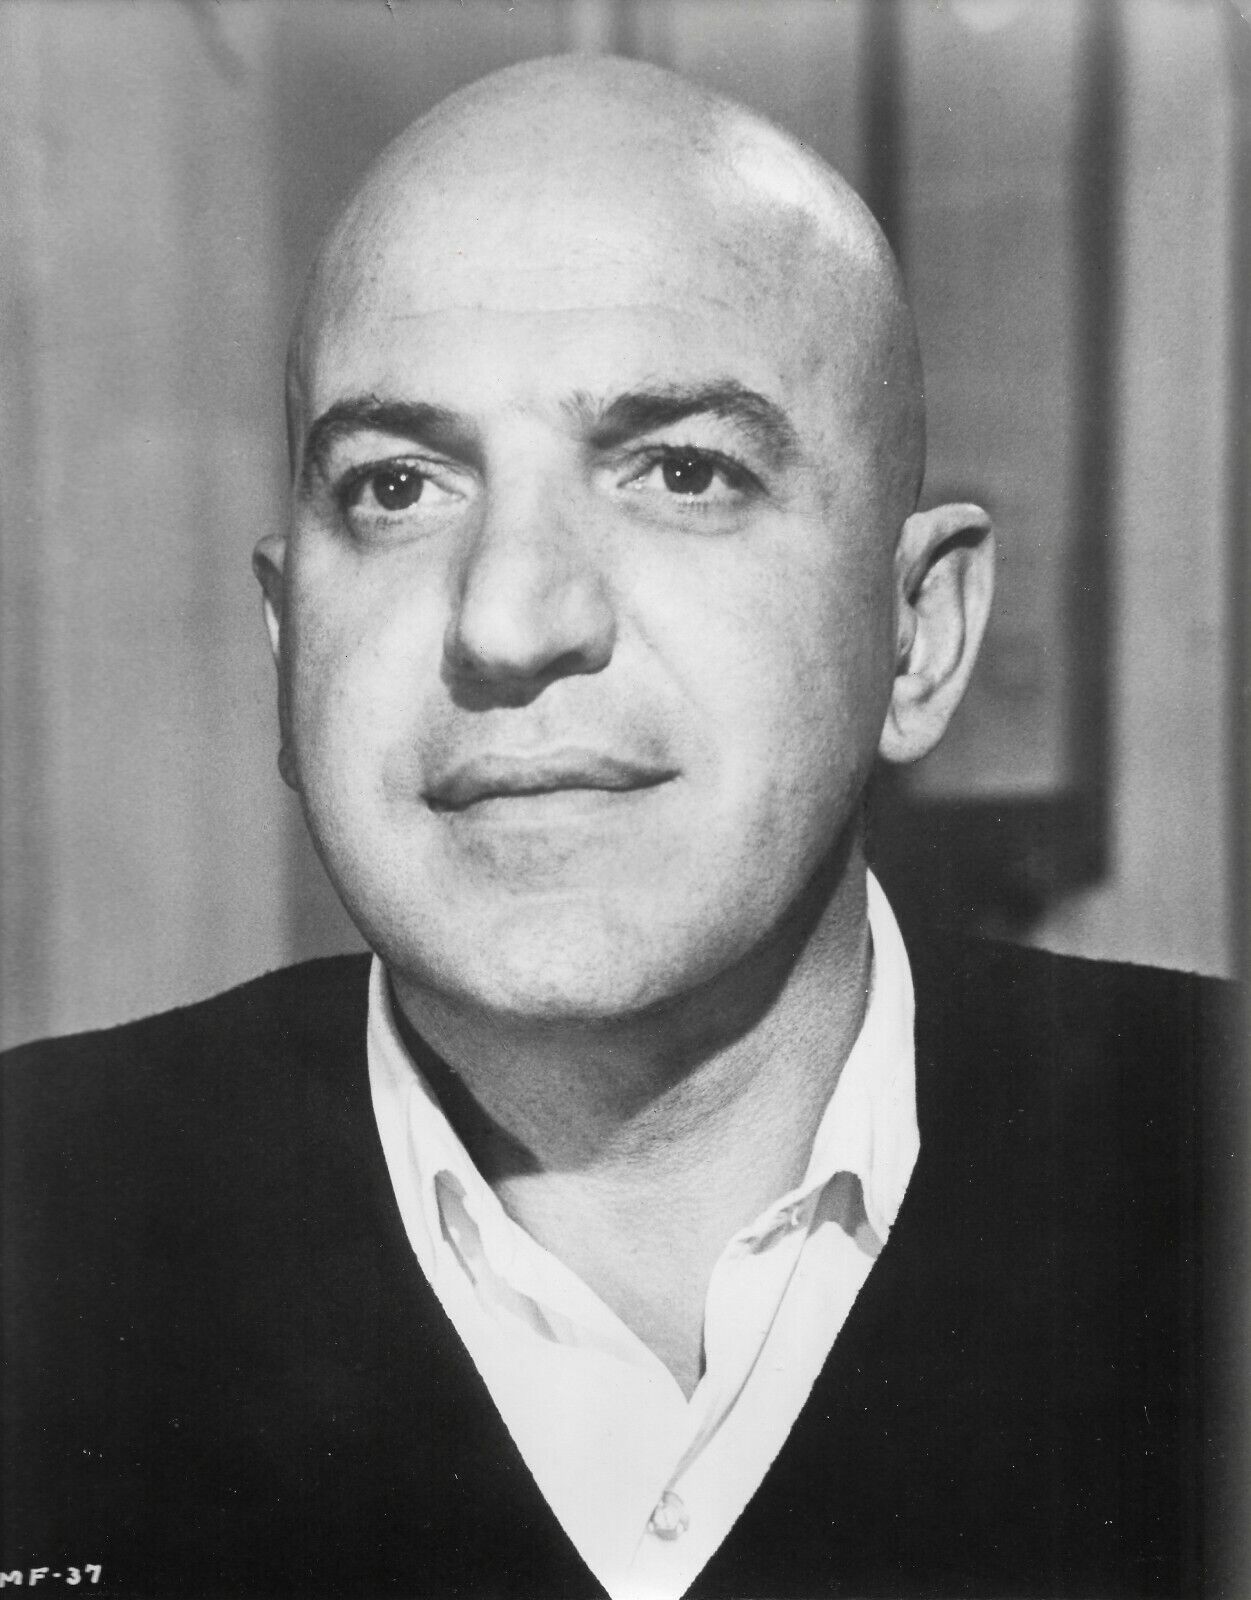 Telly Savalas Photograph Actor Promotional Movies Television 8x10